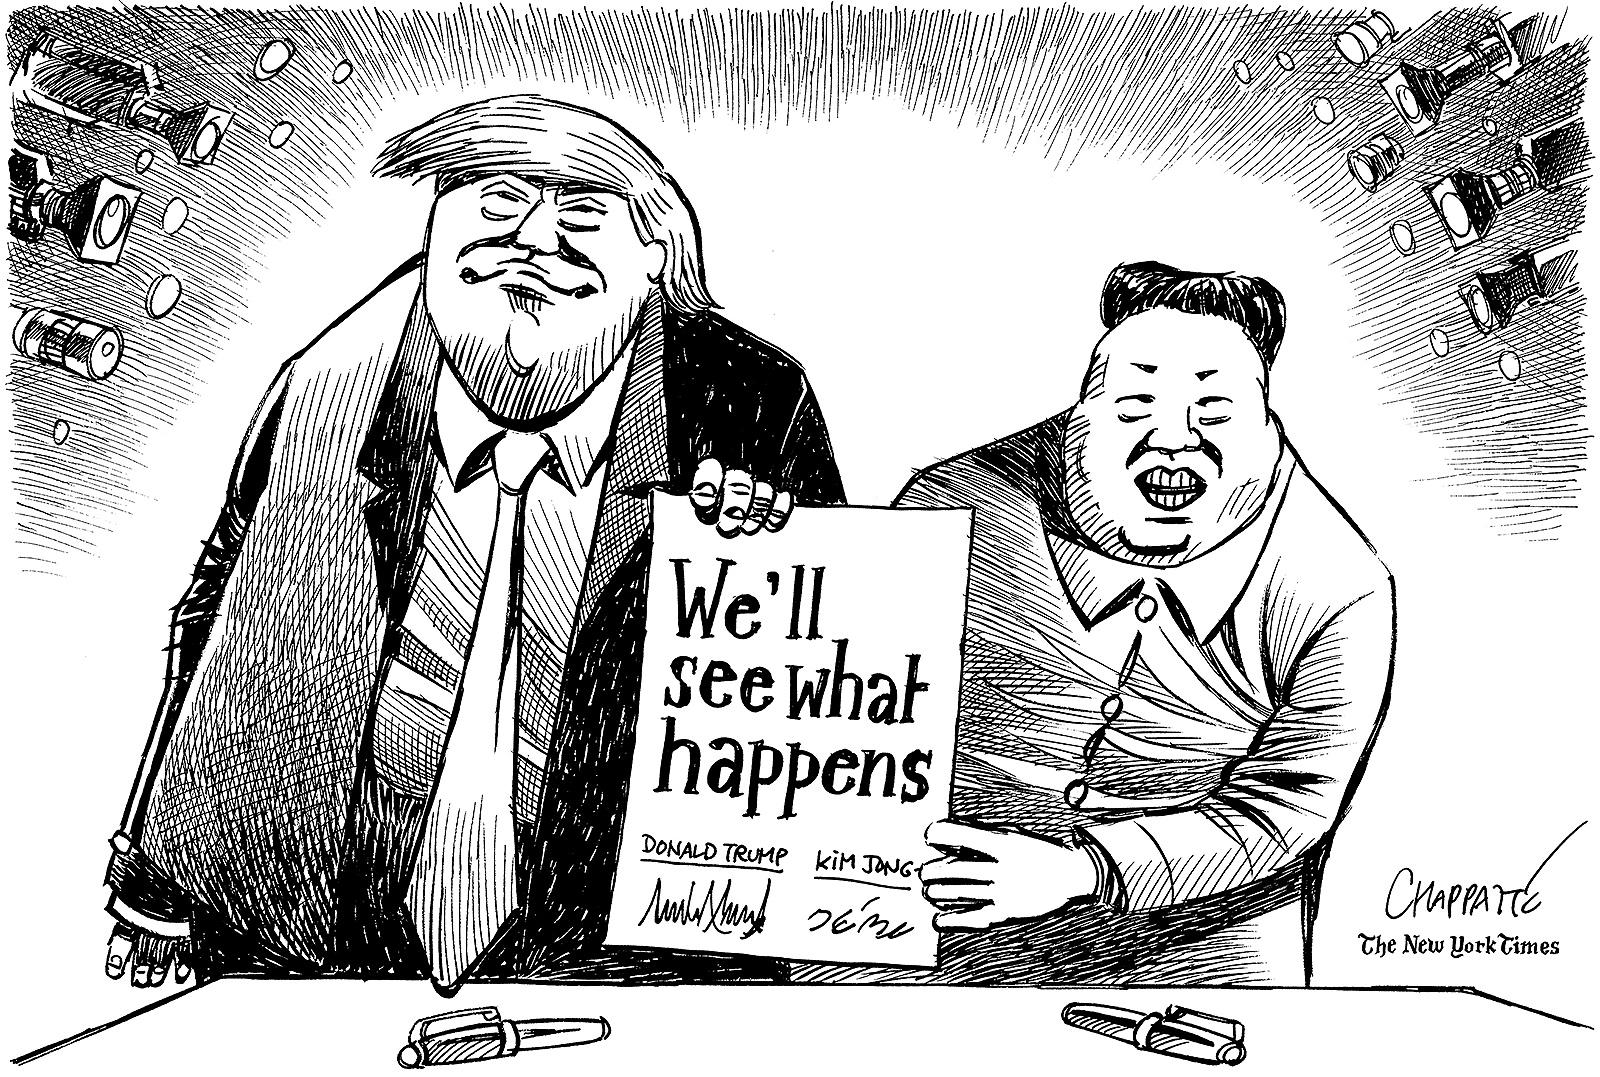 Trump and Kim sign up